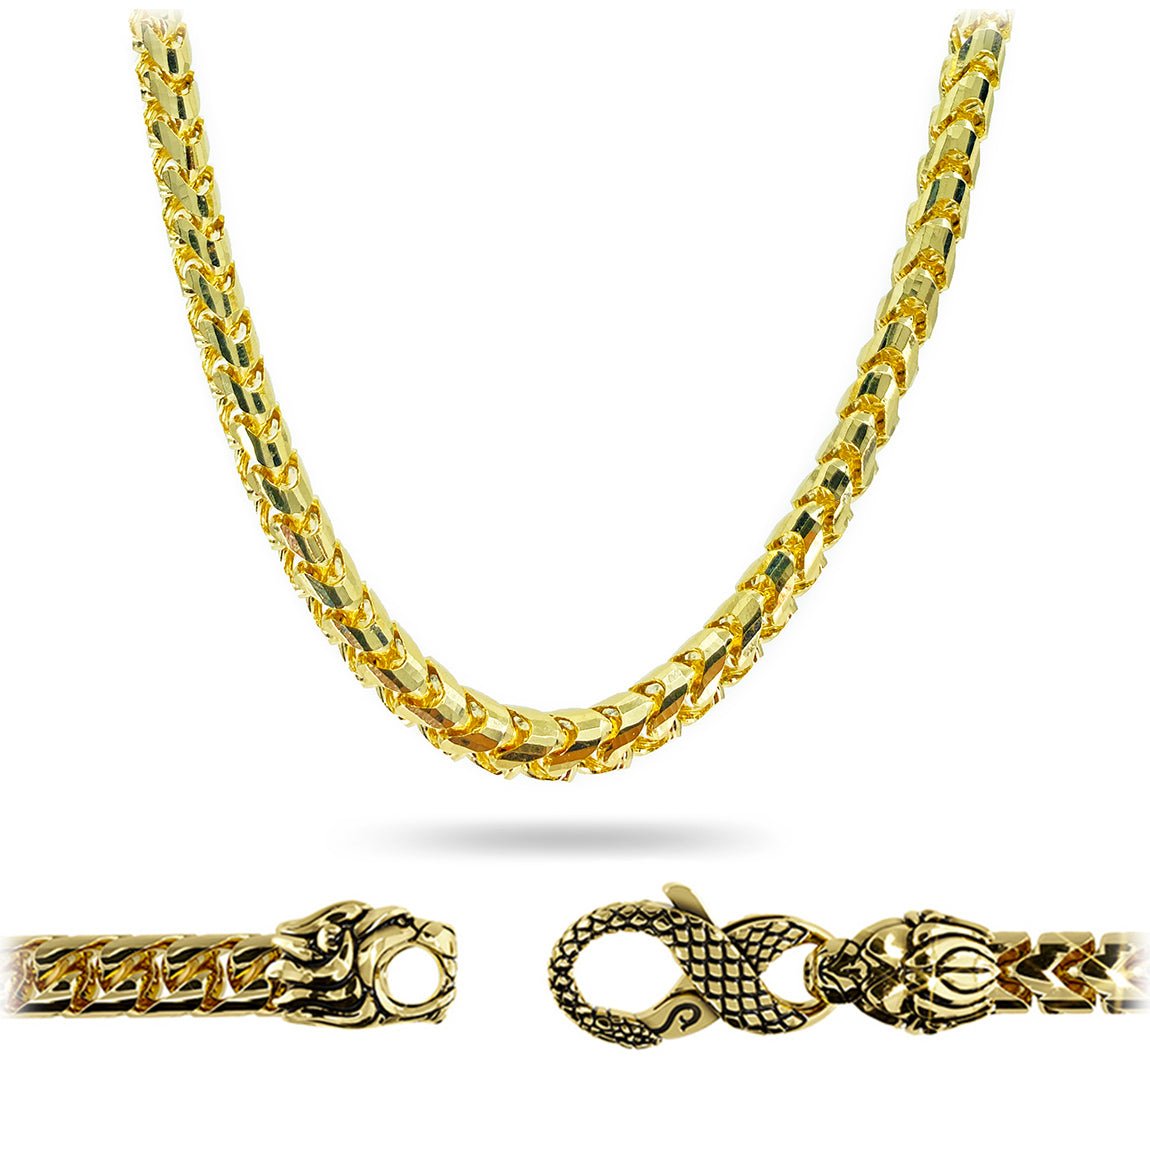 Franco Chain in 14K Yellow Gold, 22